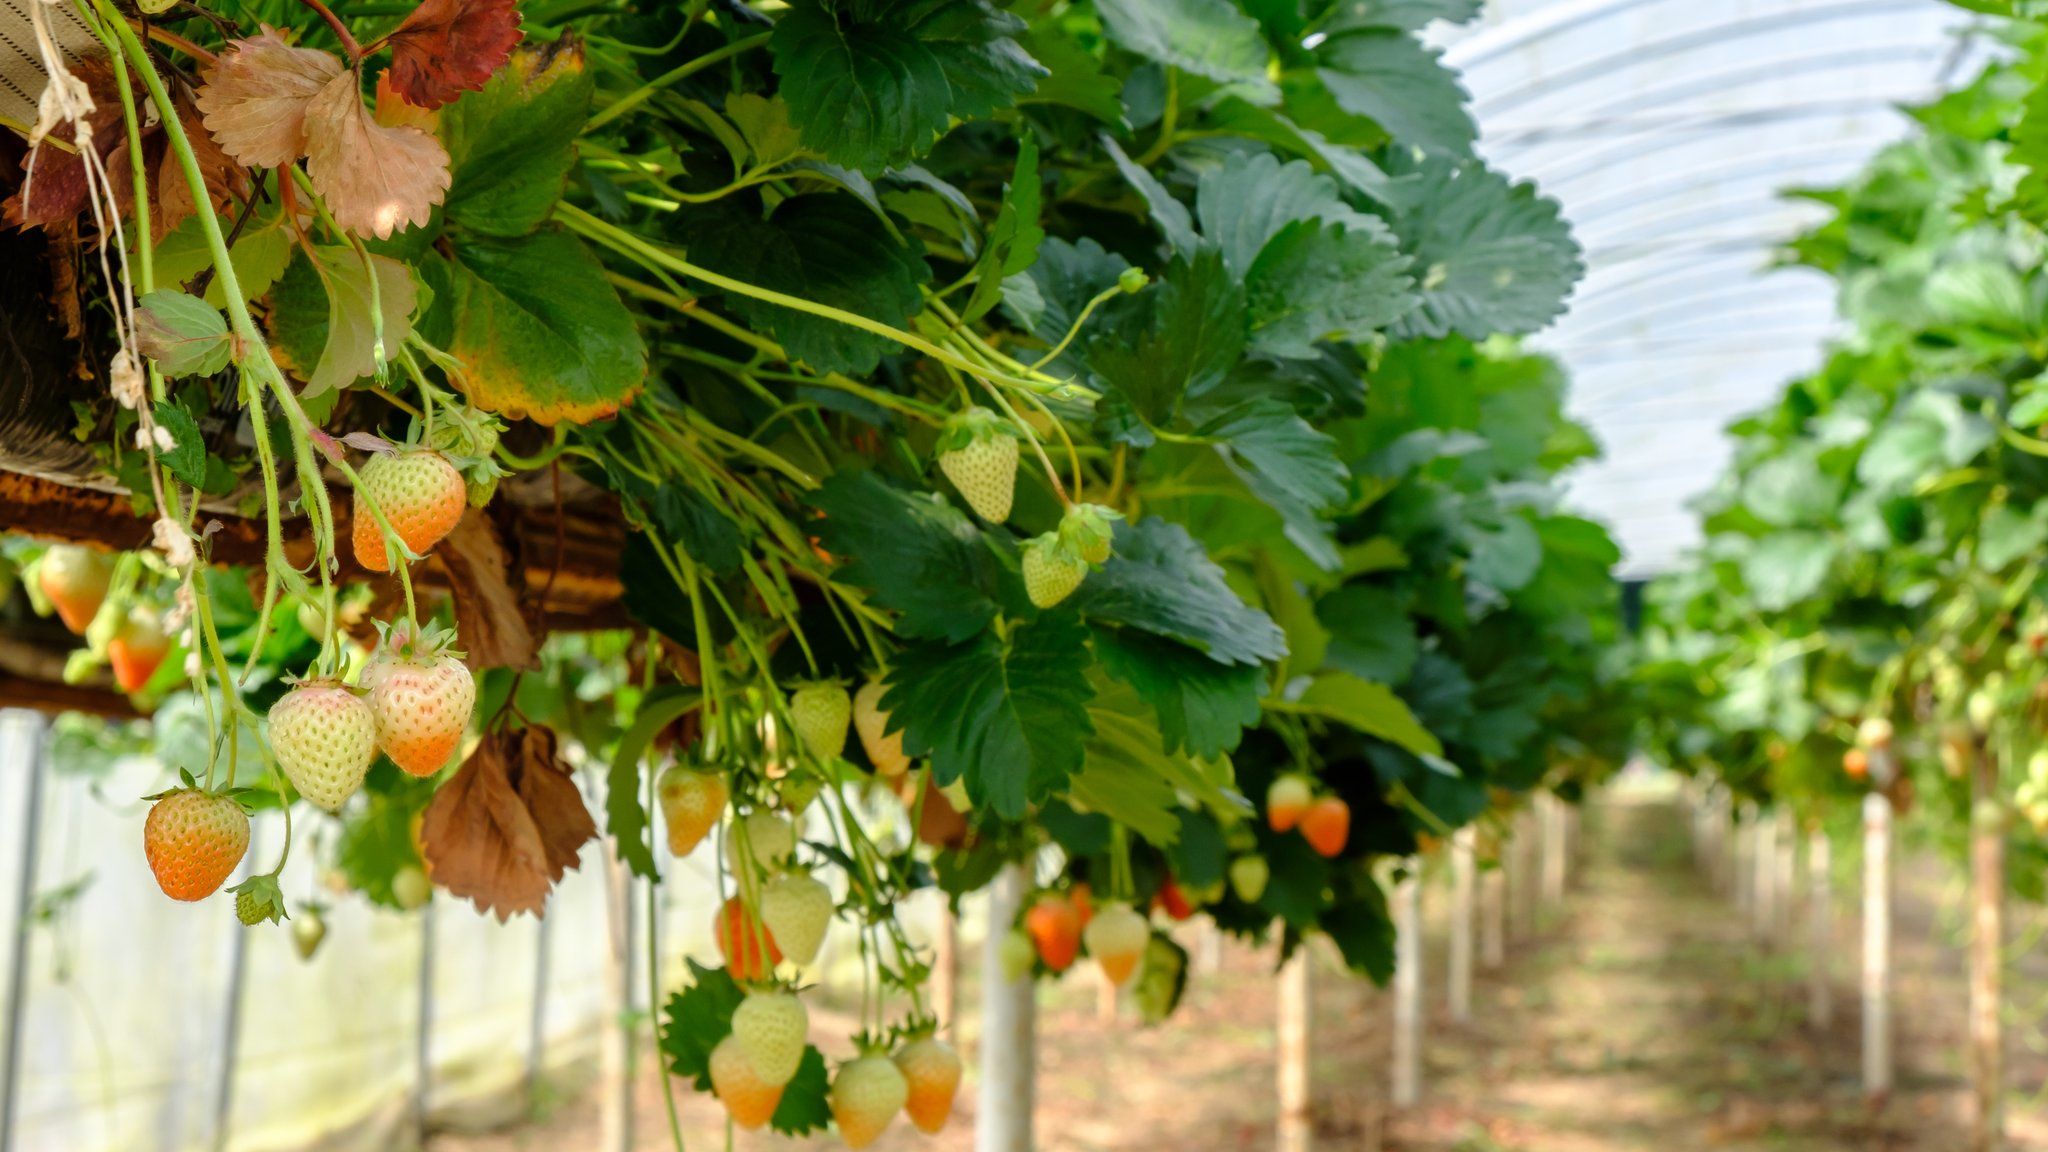 Strawberry plants in a polytunnel